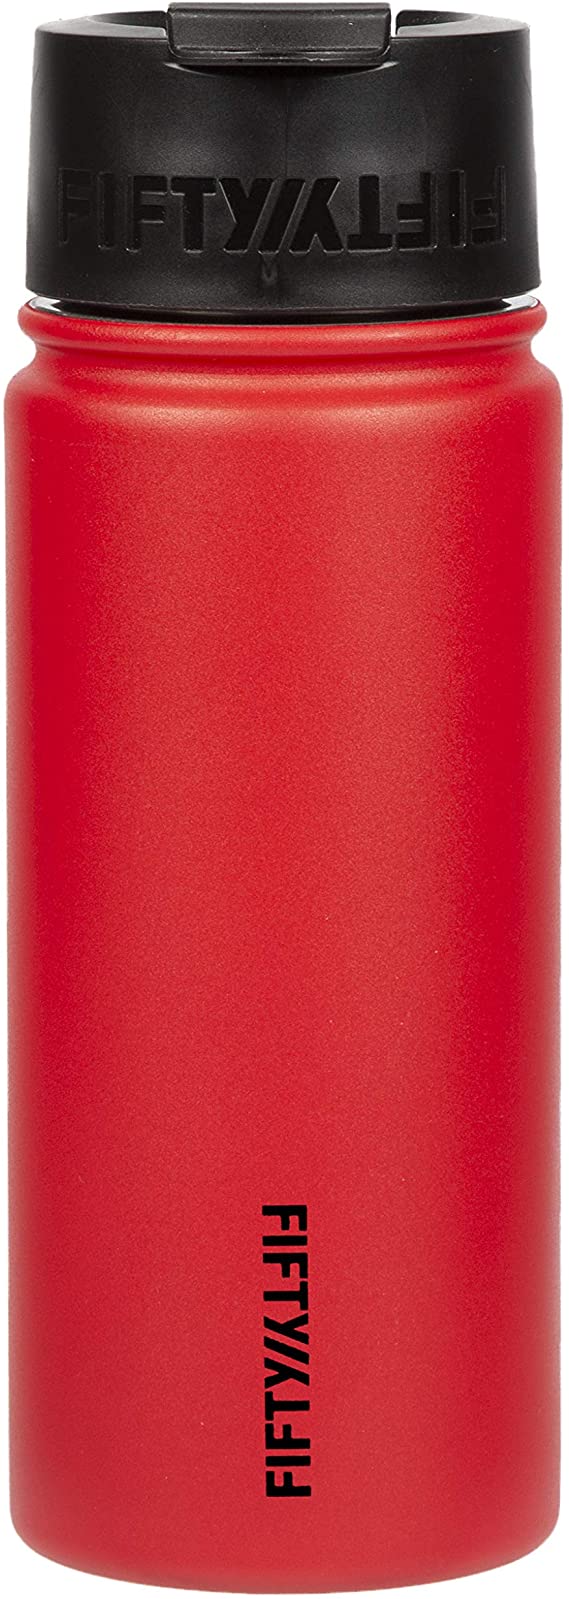 Fifty/Fifty, Double Wall Vacuum Insulated Café Water Bottle, 12oz - Cherry Red Bottle-Flip Cap